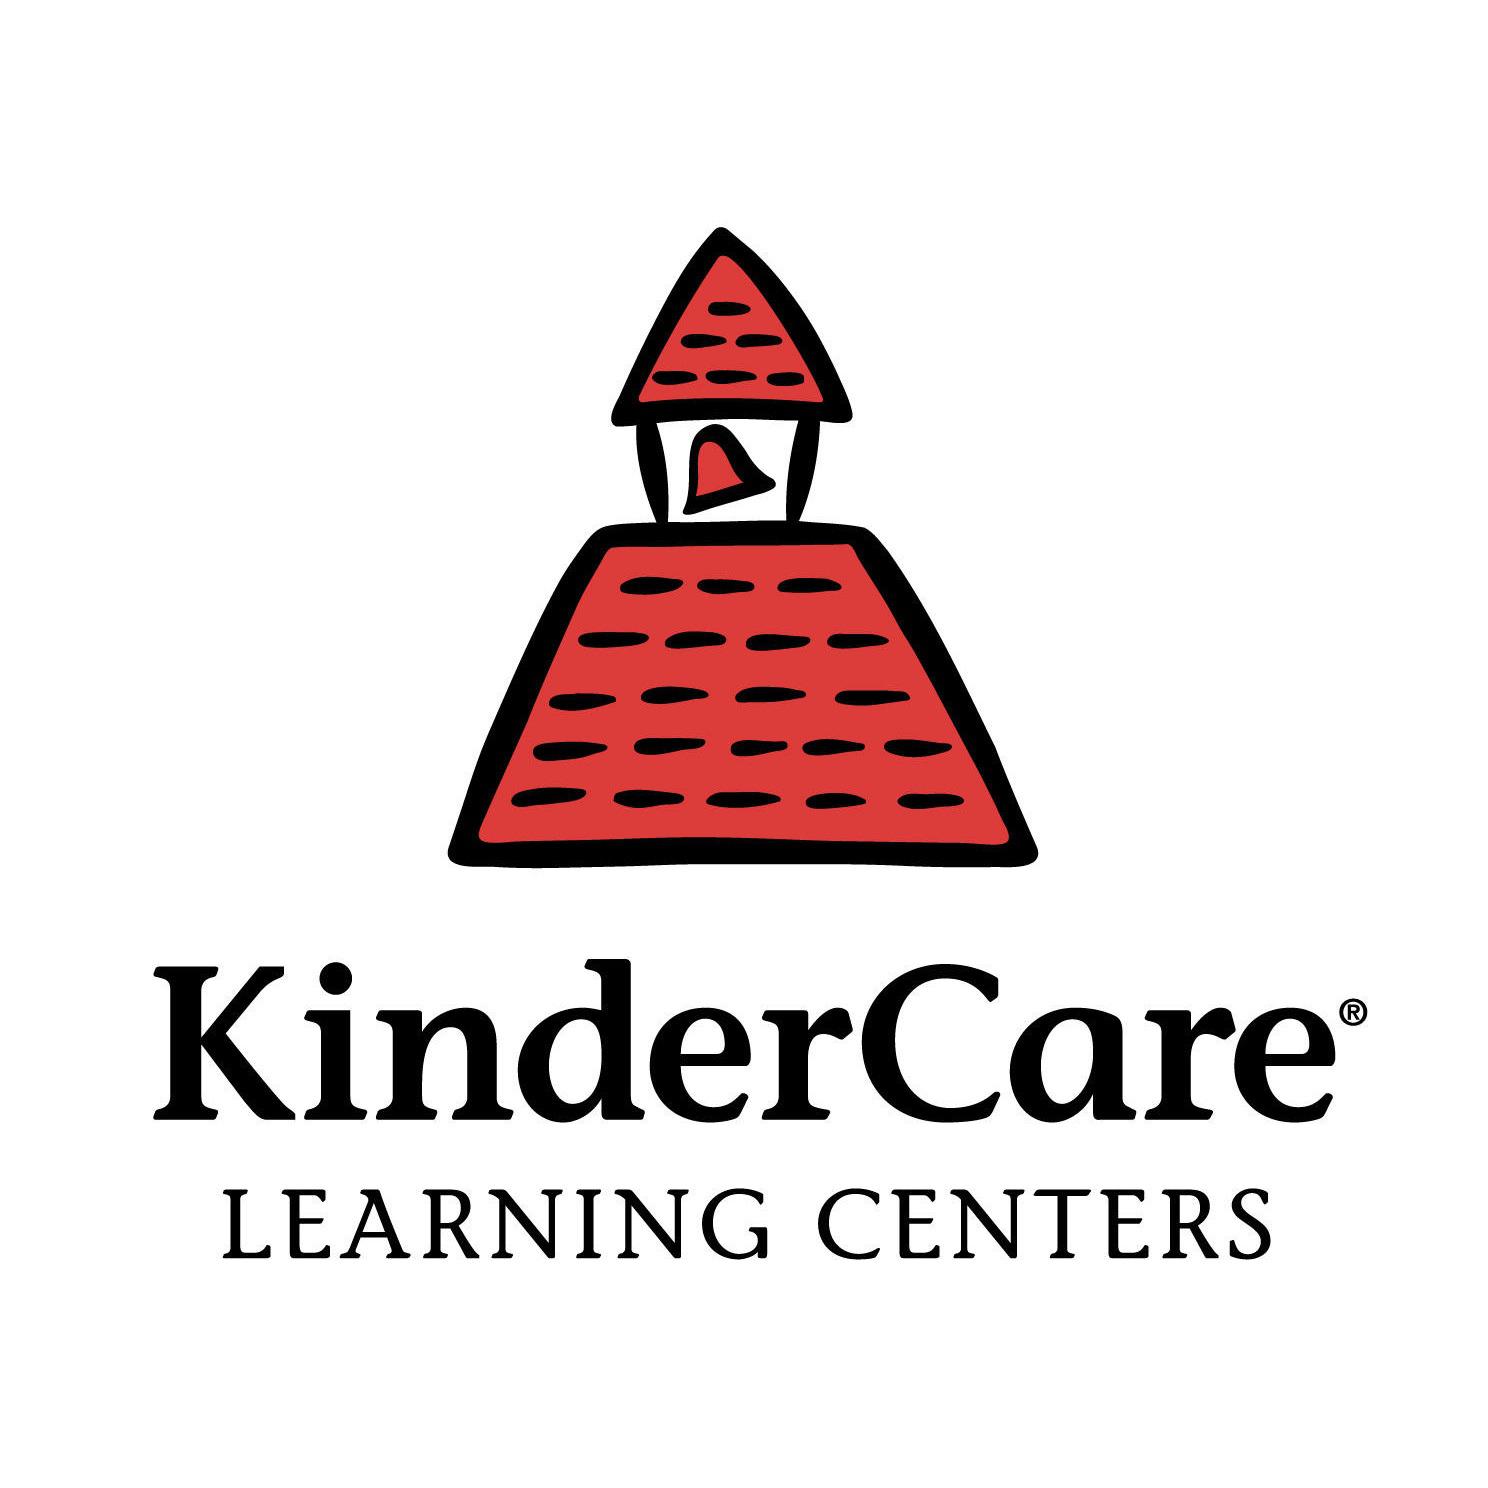 Lacey KinderCare